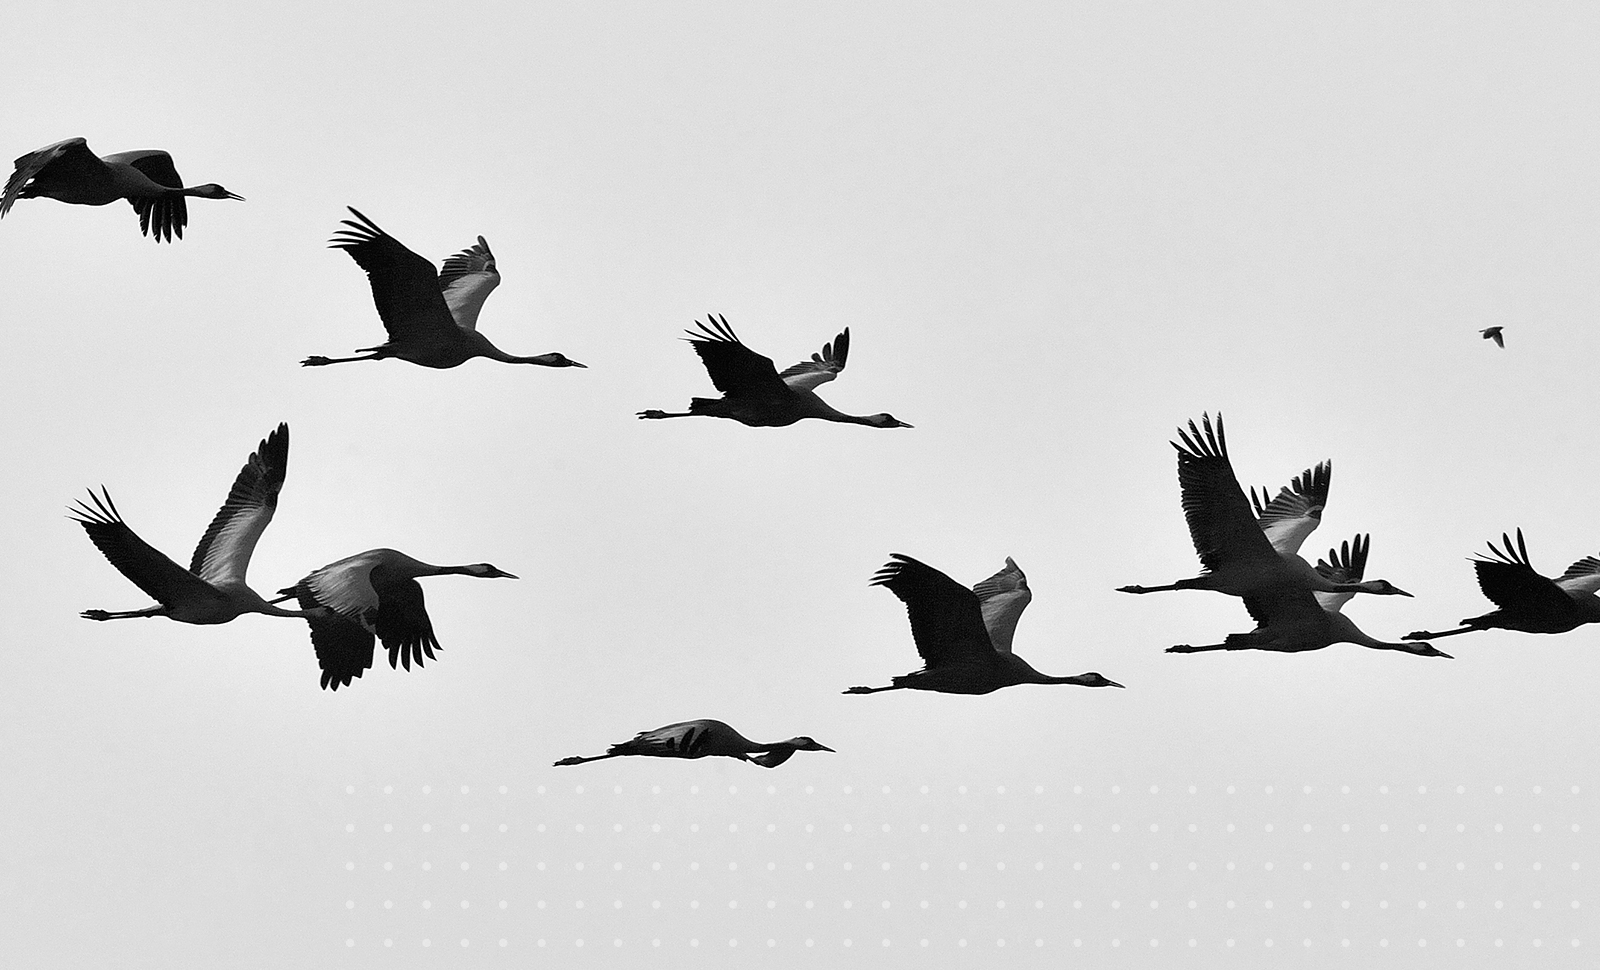 Geese flying in v-formation representing a cloud data migration